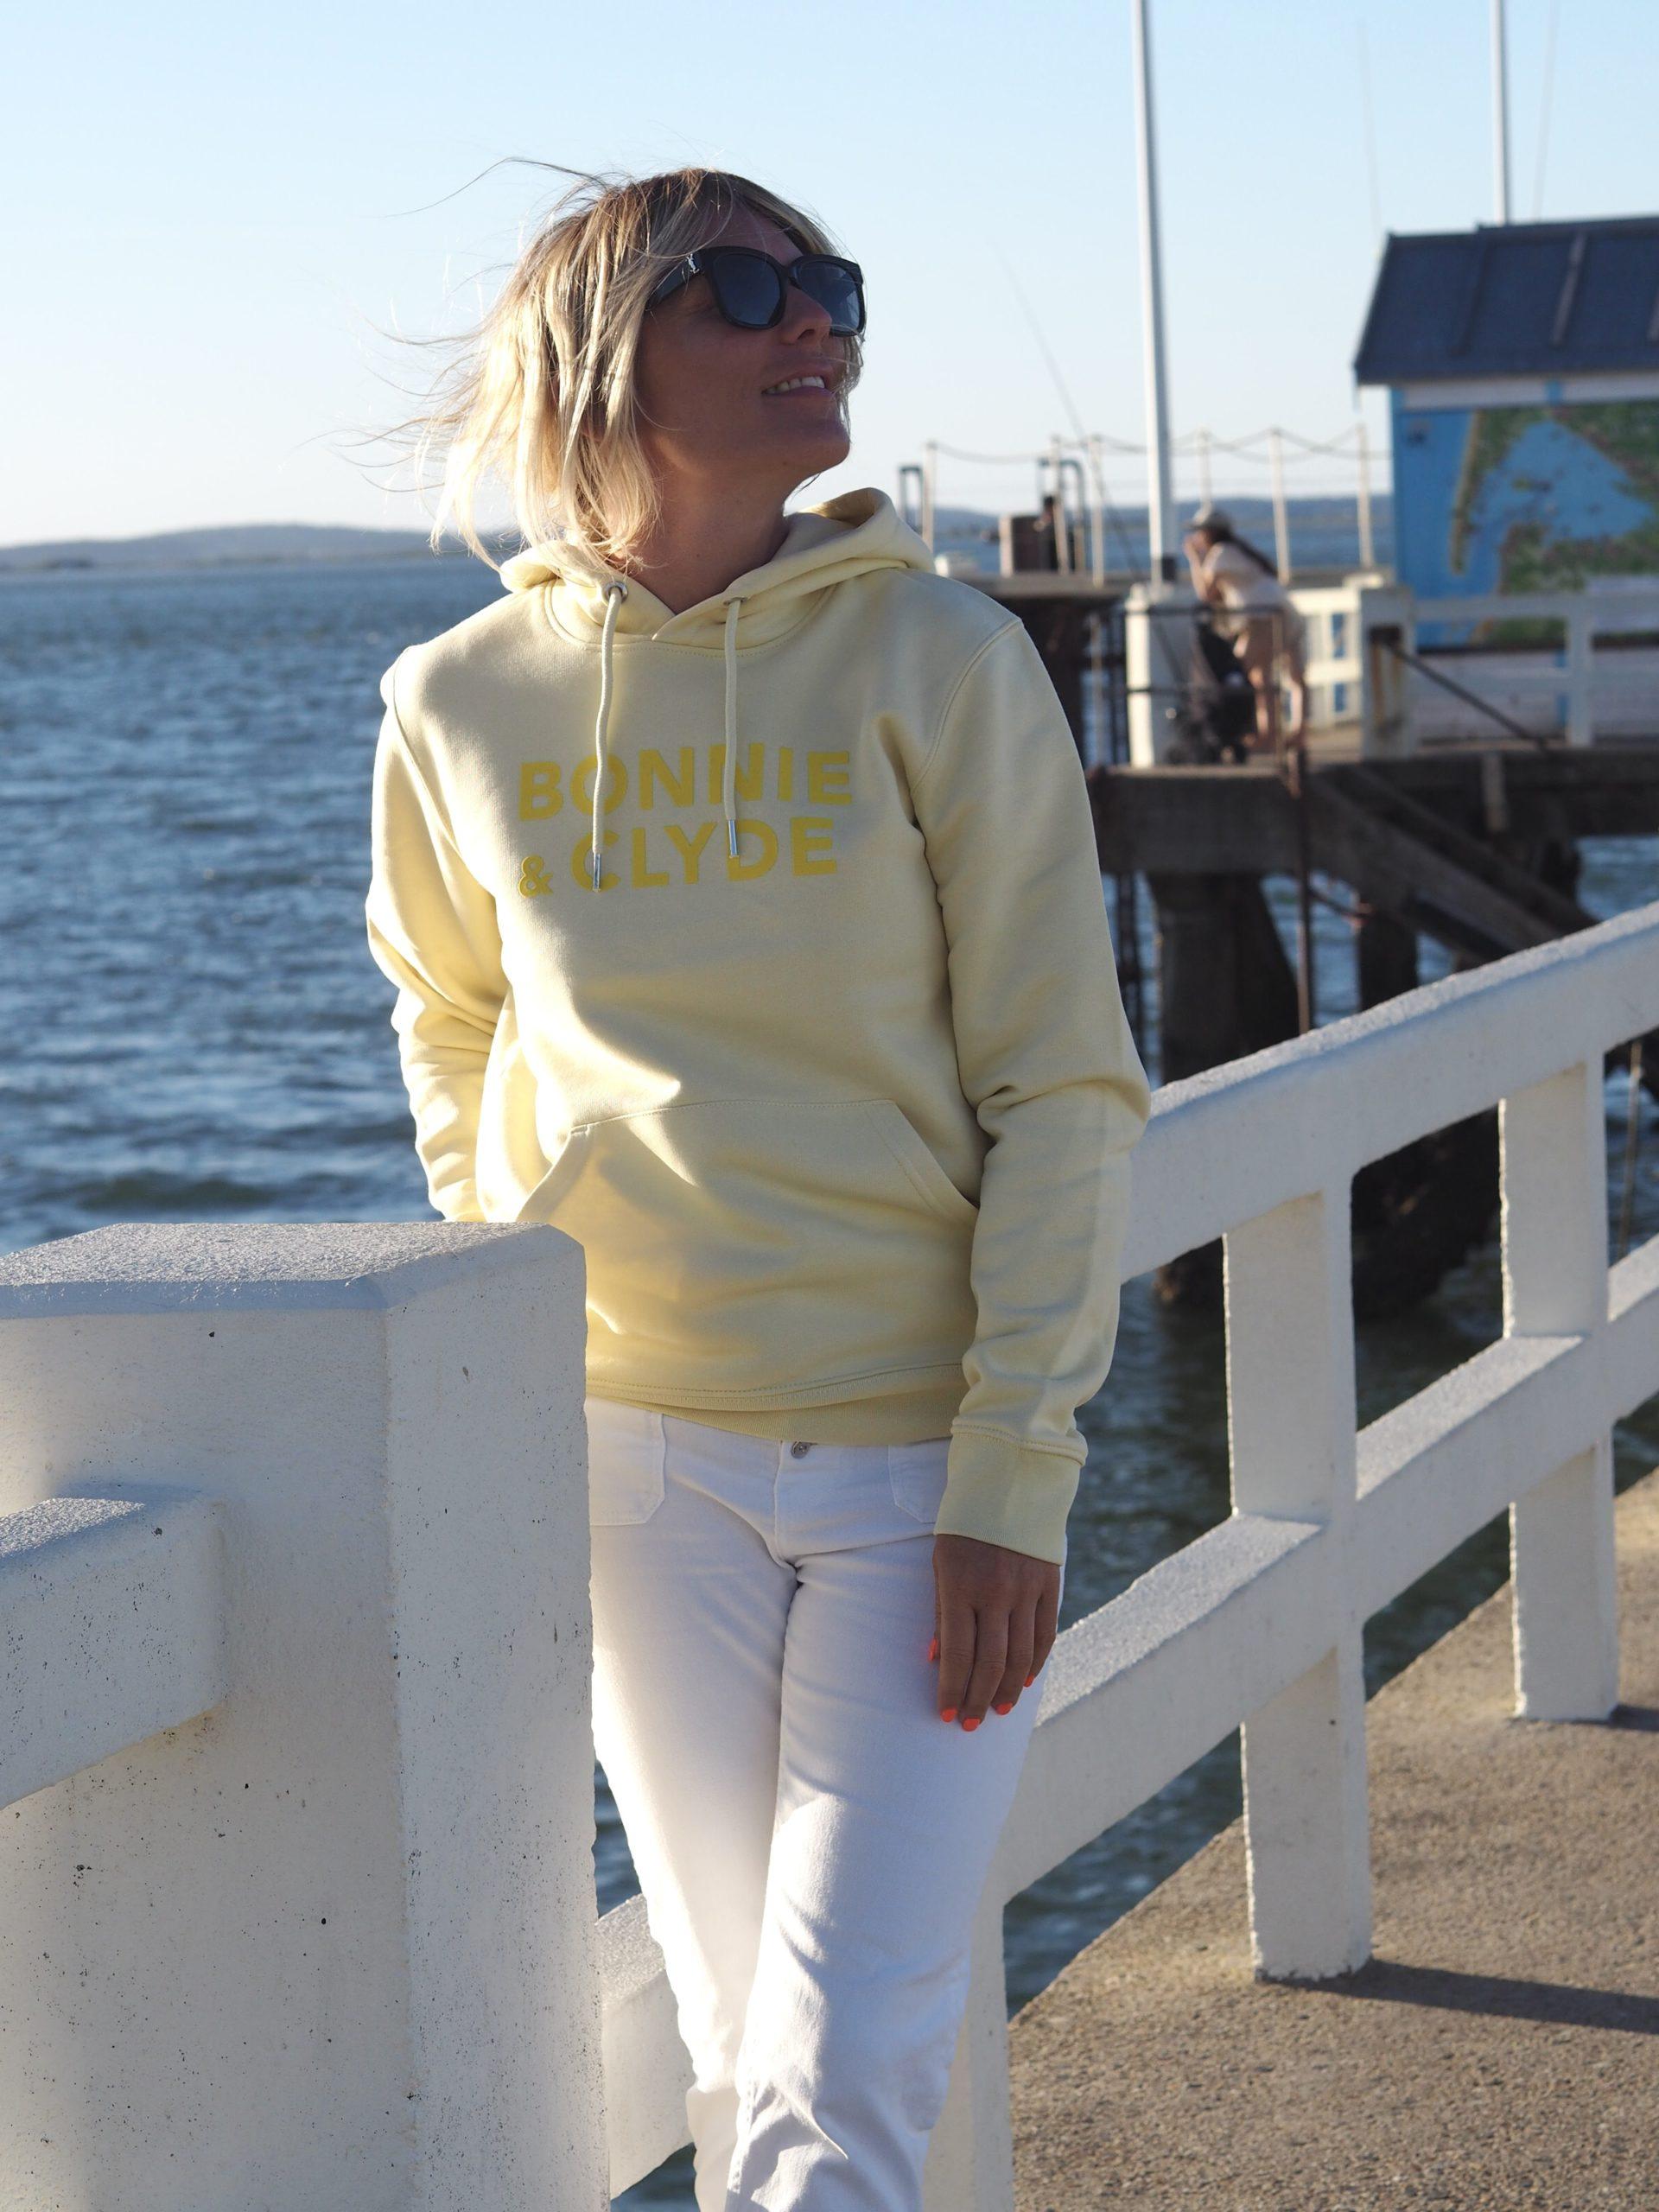 Hoodie Loose  BONNIE & CLYDE  Beurre / Velours Jaune